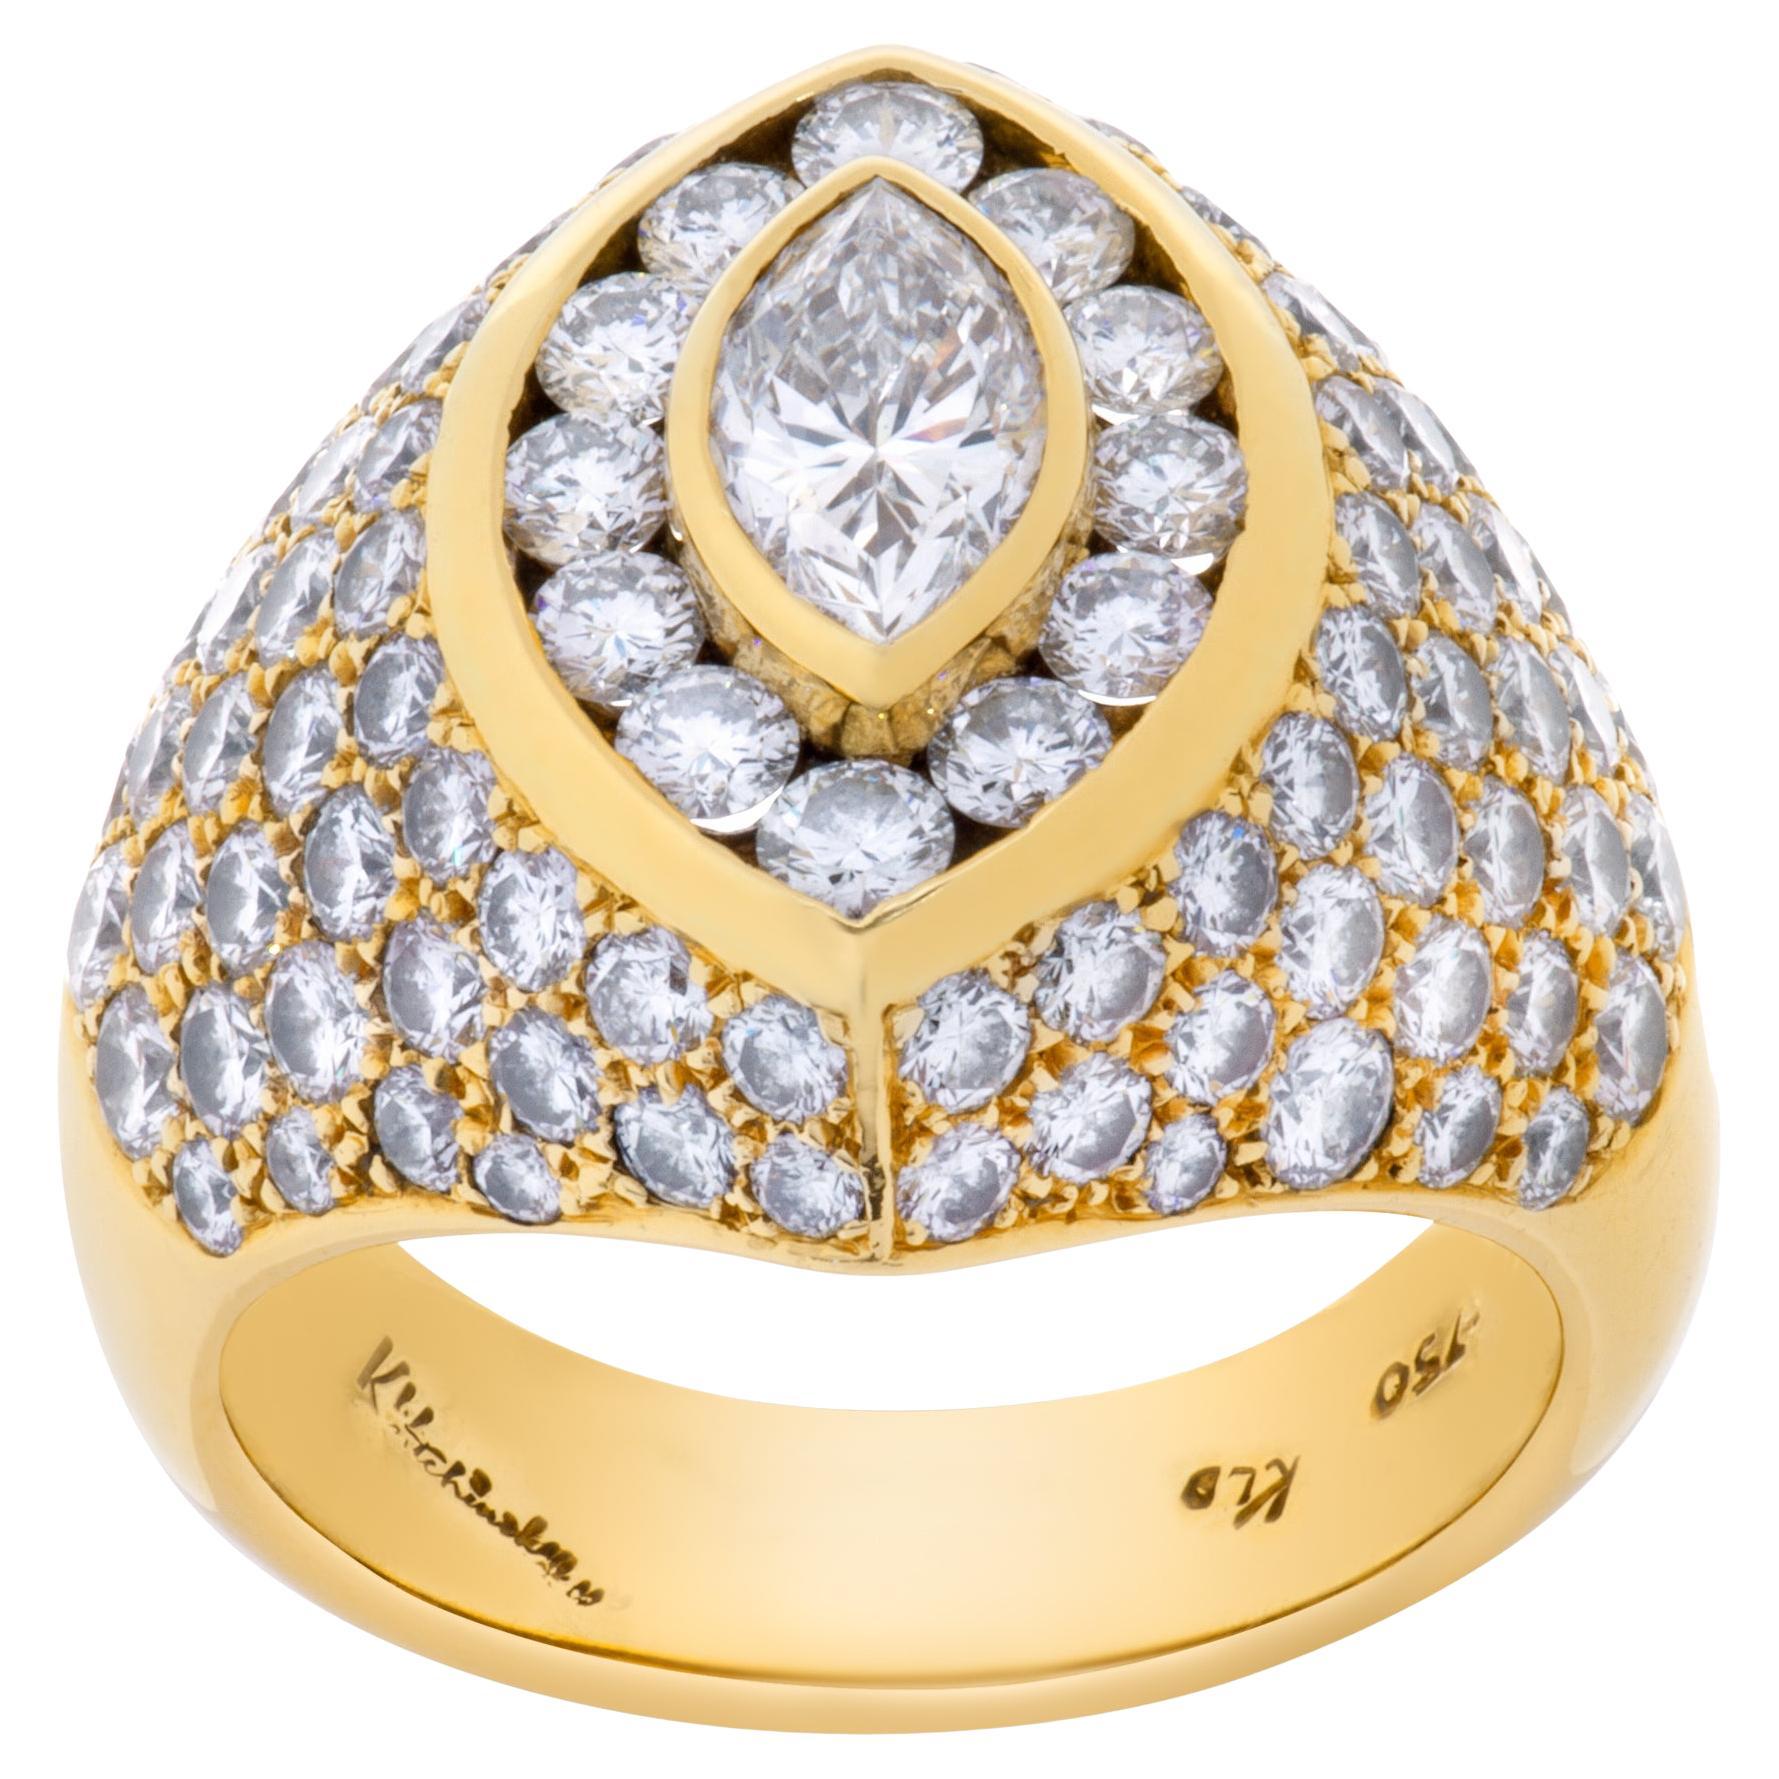 Diamond Pave Ring in 18K Yellow Gold, 4 Carats in Diamonds